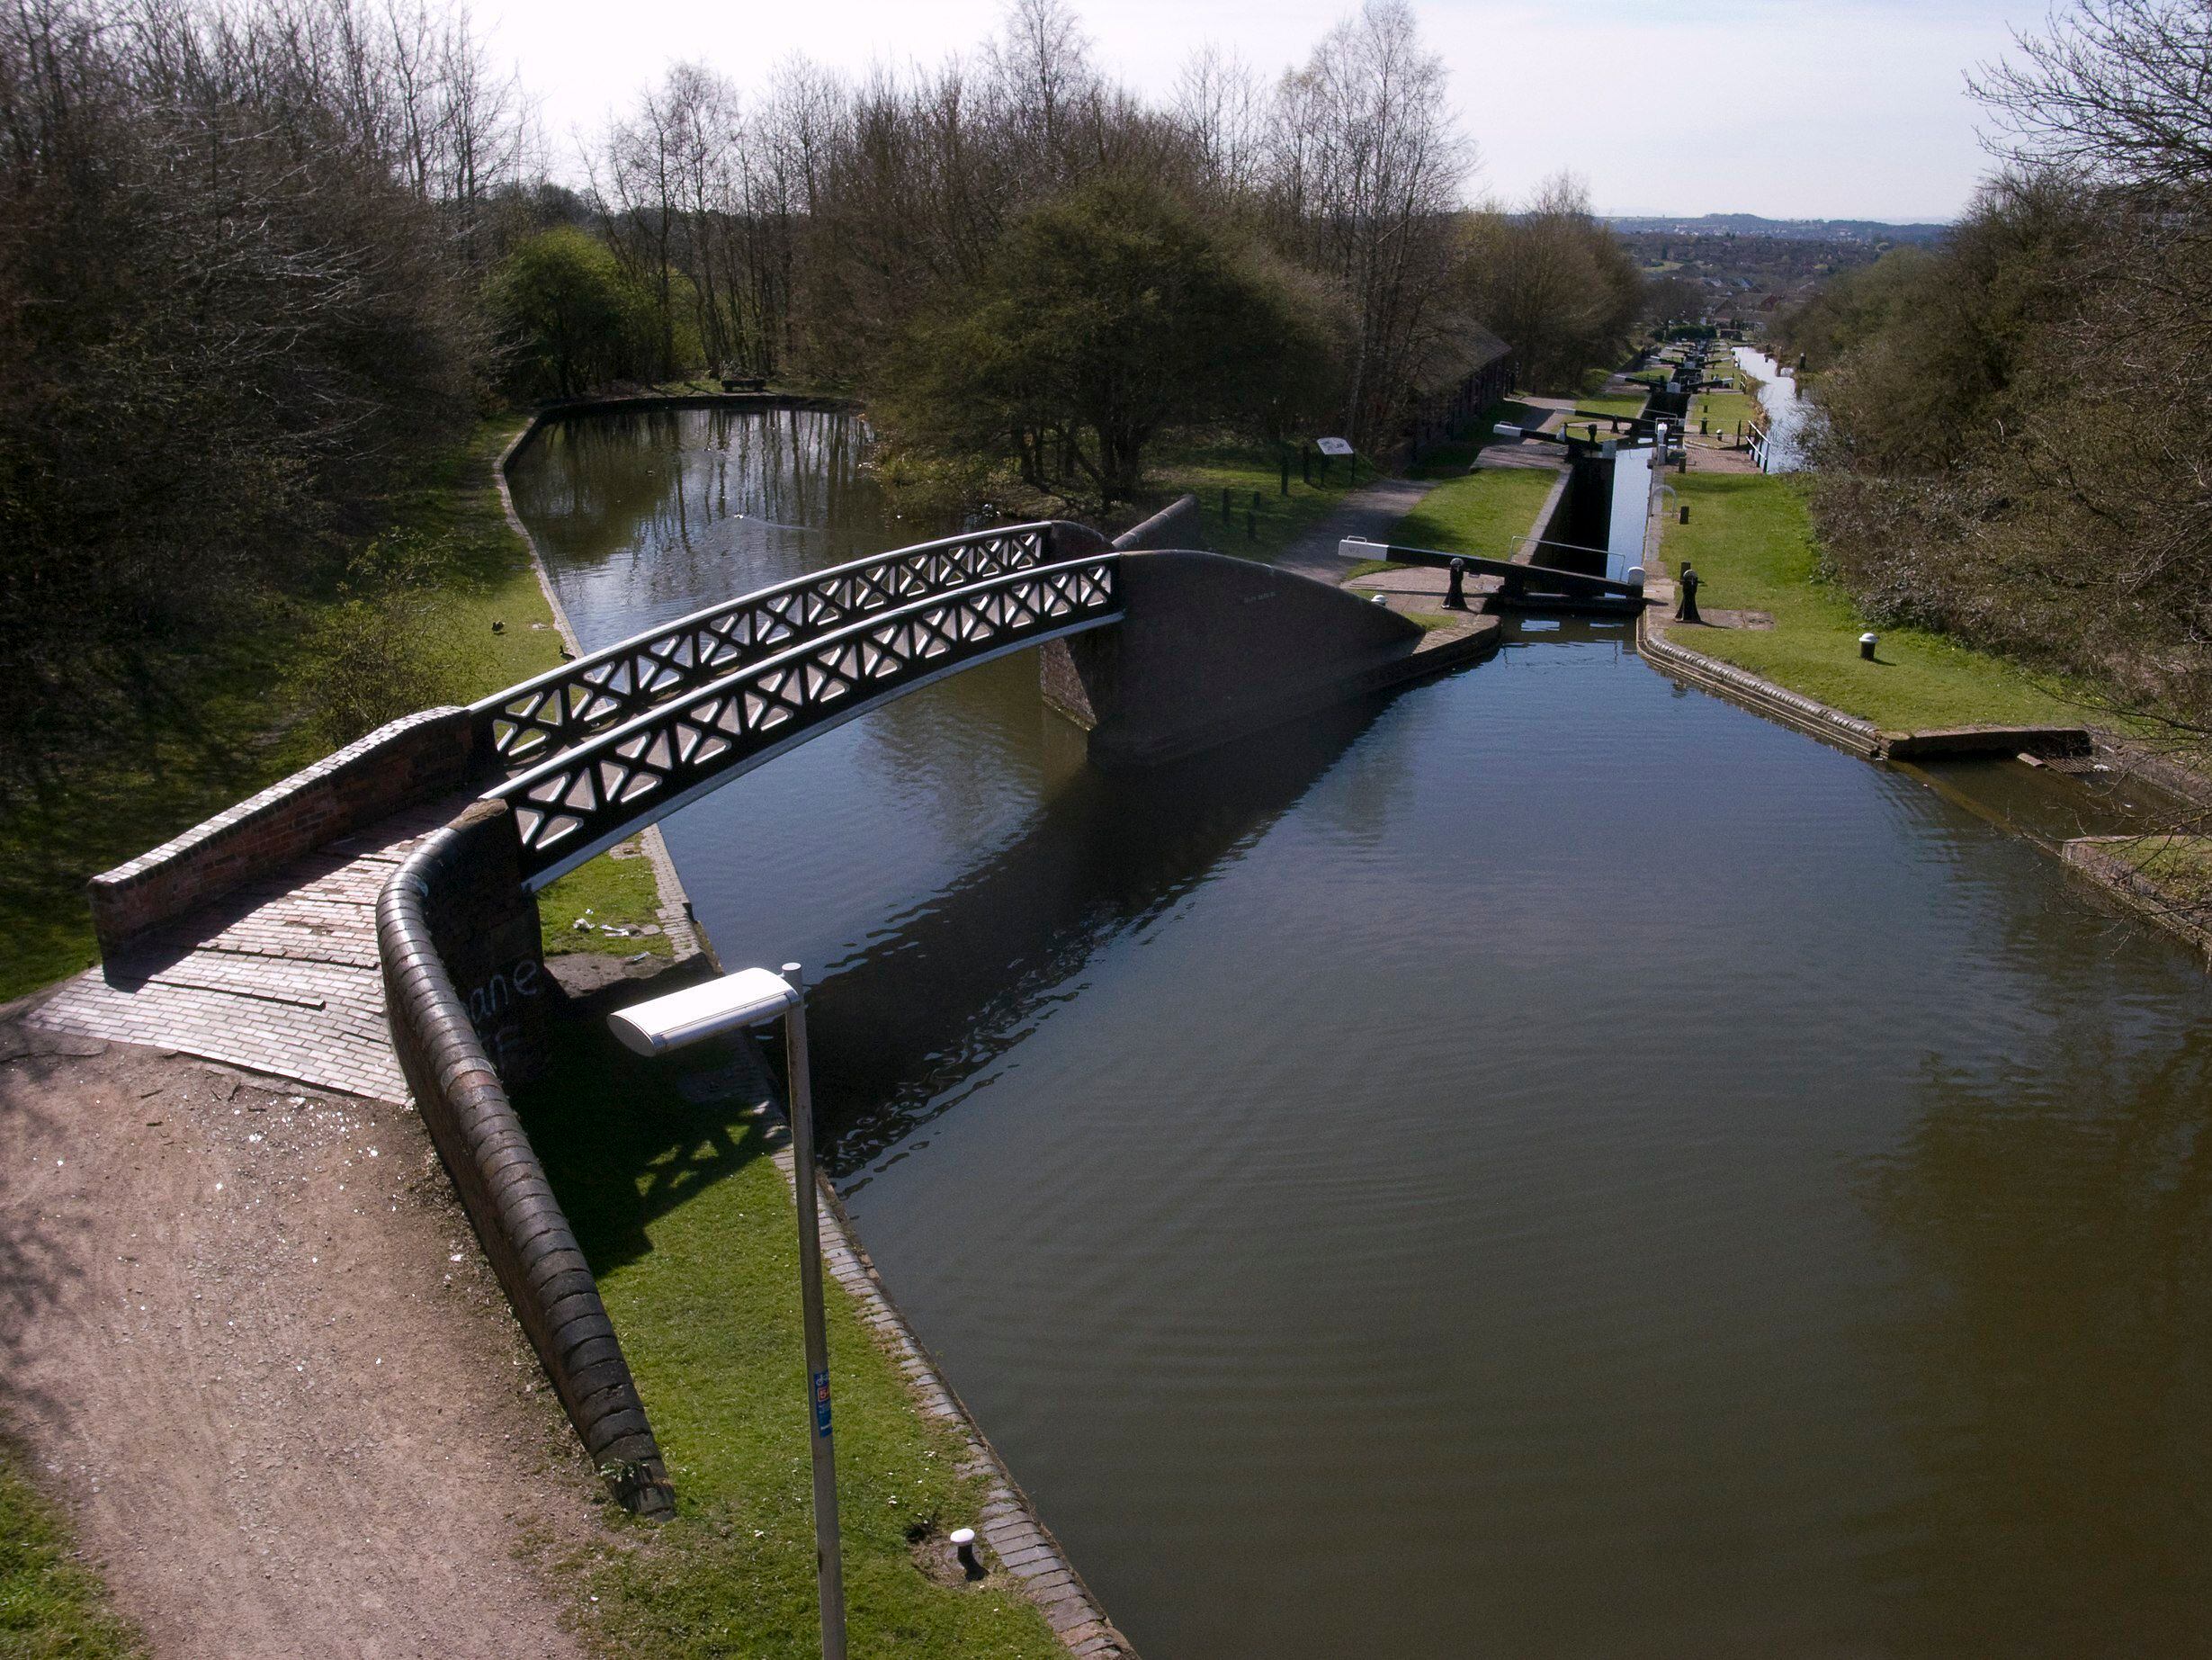 Man found seriously injured near Black Country canal